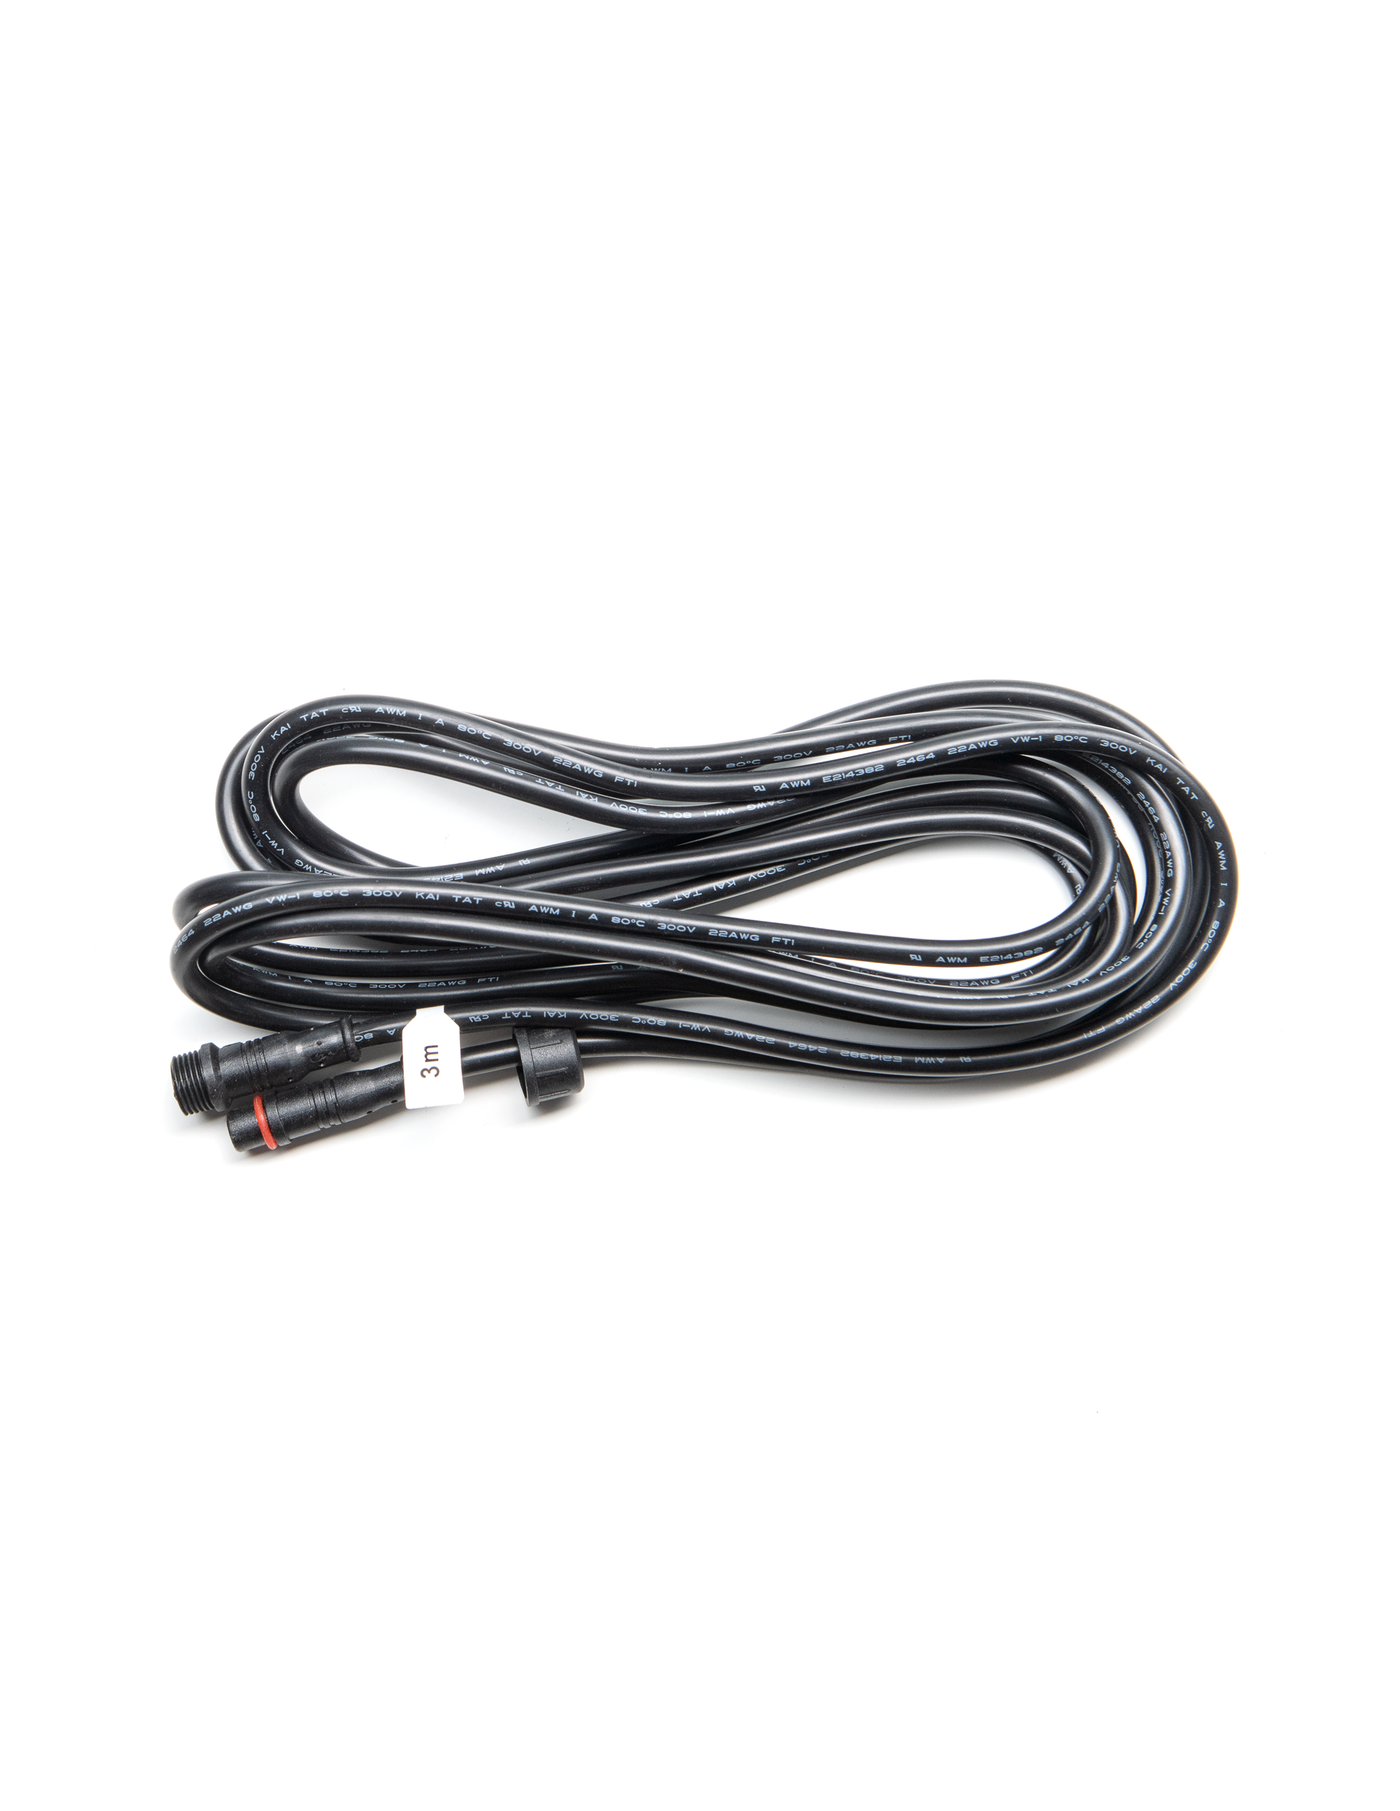 3m Rock Light Extension Wire - North Lights